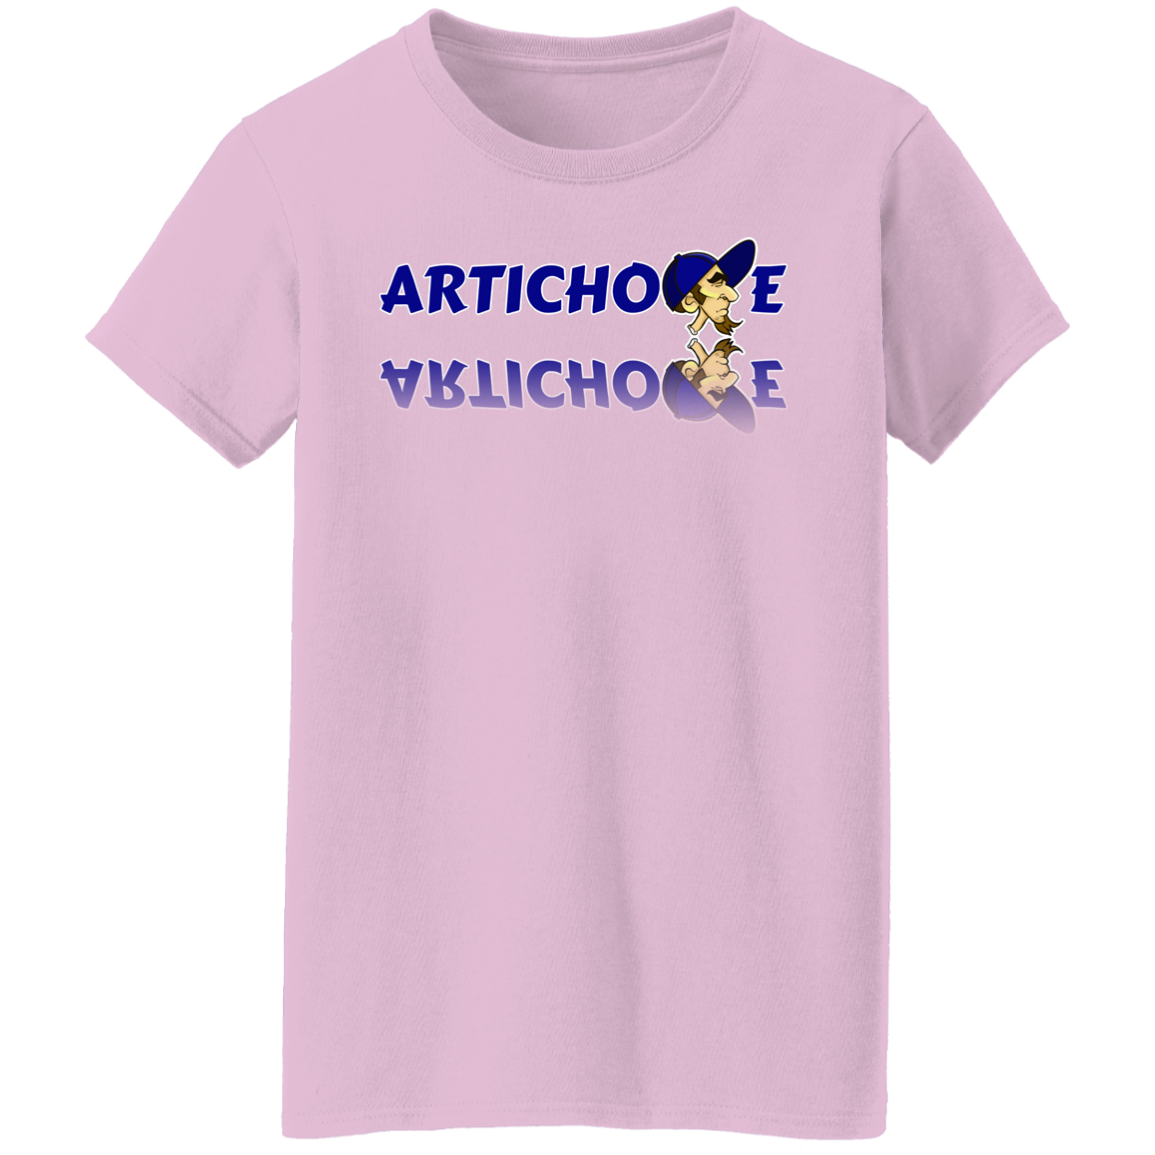 ZZ#20 ArtichokeUSA Characters and Fonts. "Clem" Let’s Create Your Own Design Today. Ladies' 5.3 oz. T-Shirt